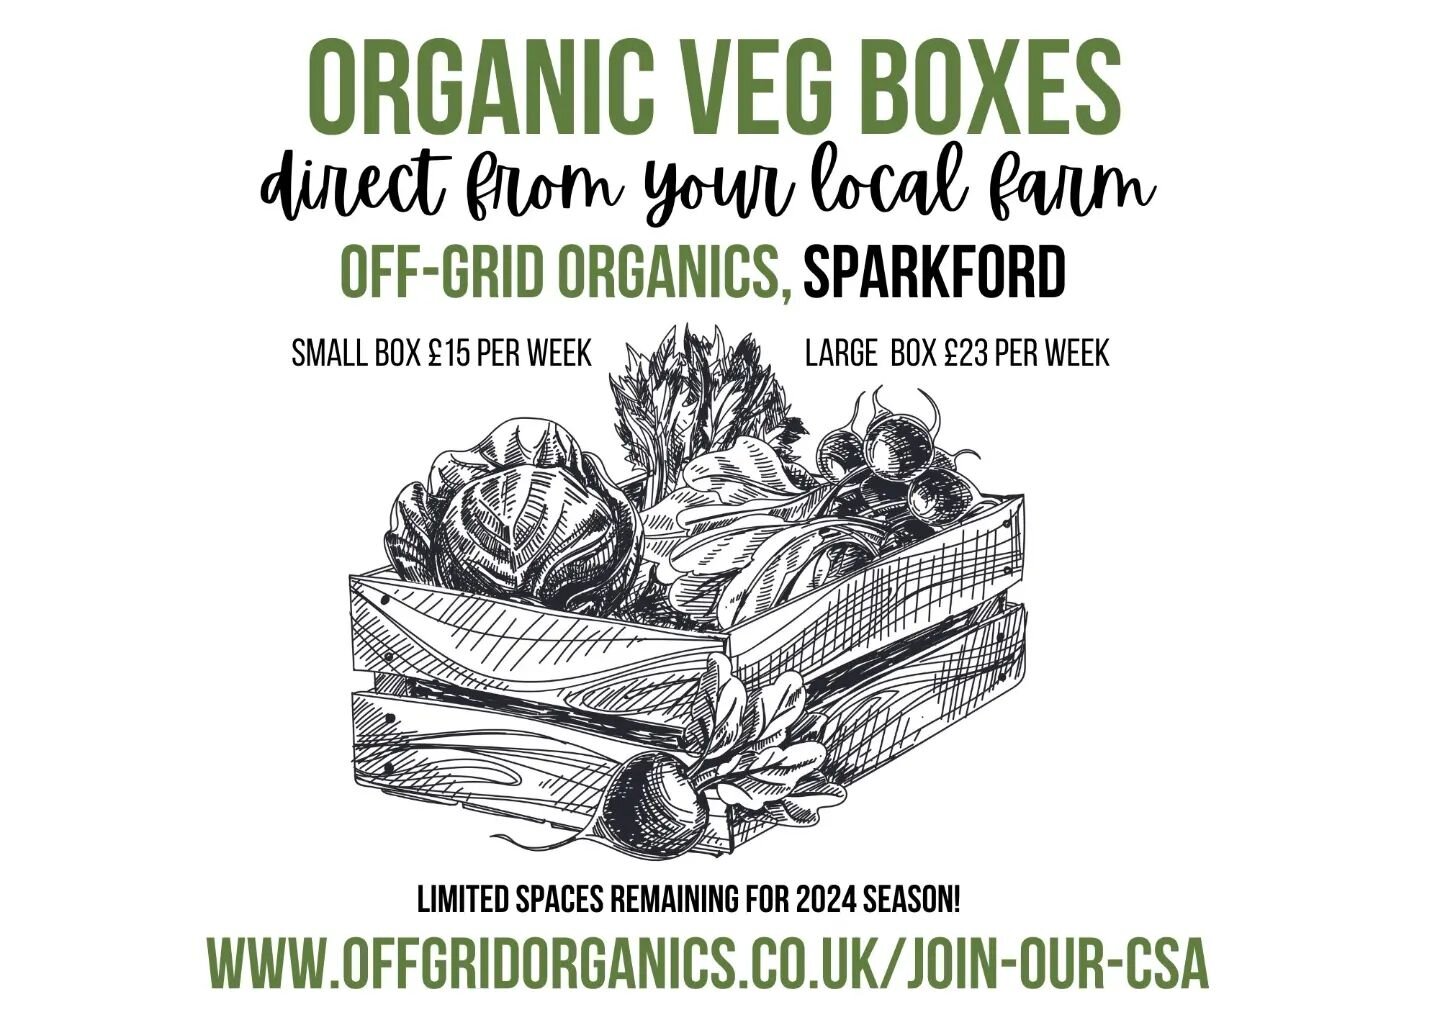 **LImited spaces available to join your local farm's CSA veg box scheme for 2024!

Knowing exactly how and where the food we eat and feed to our families is grown is a rare and beautiful thing today...find out more about Communuty Shared Agriculture 